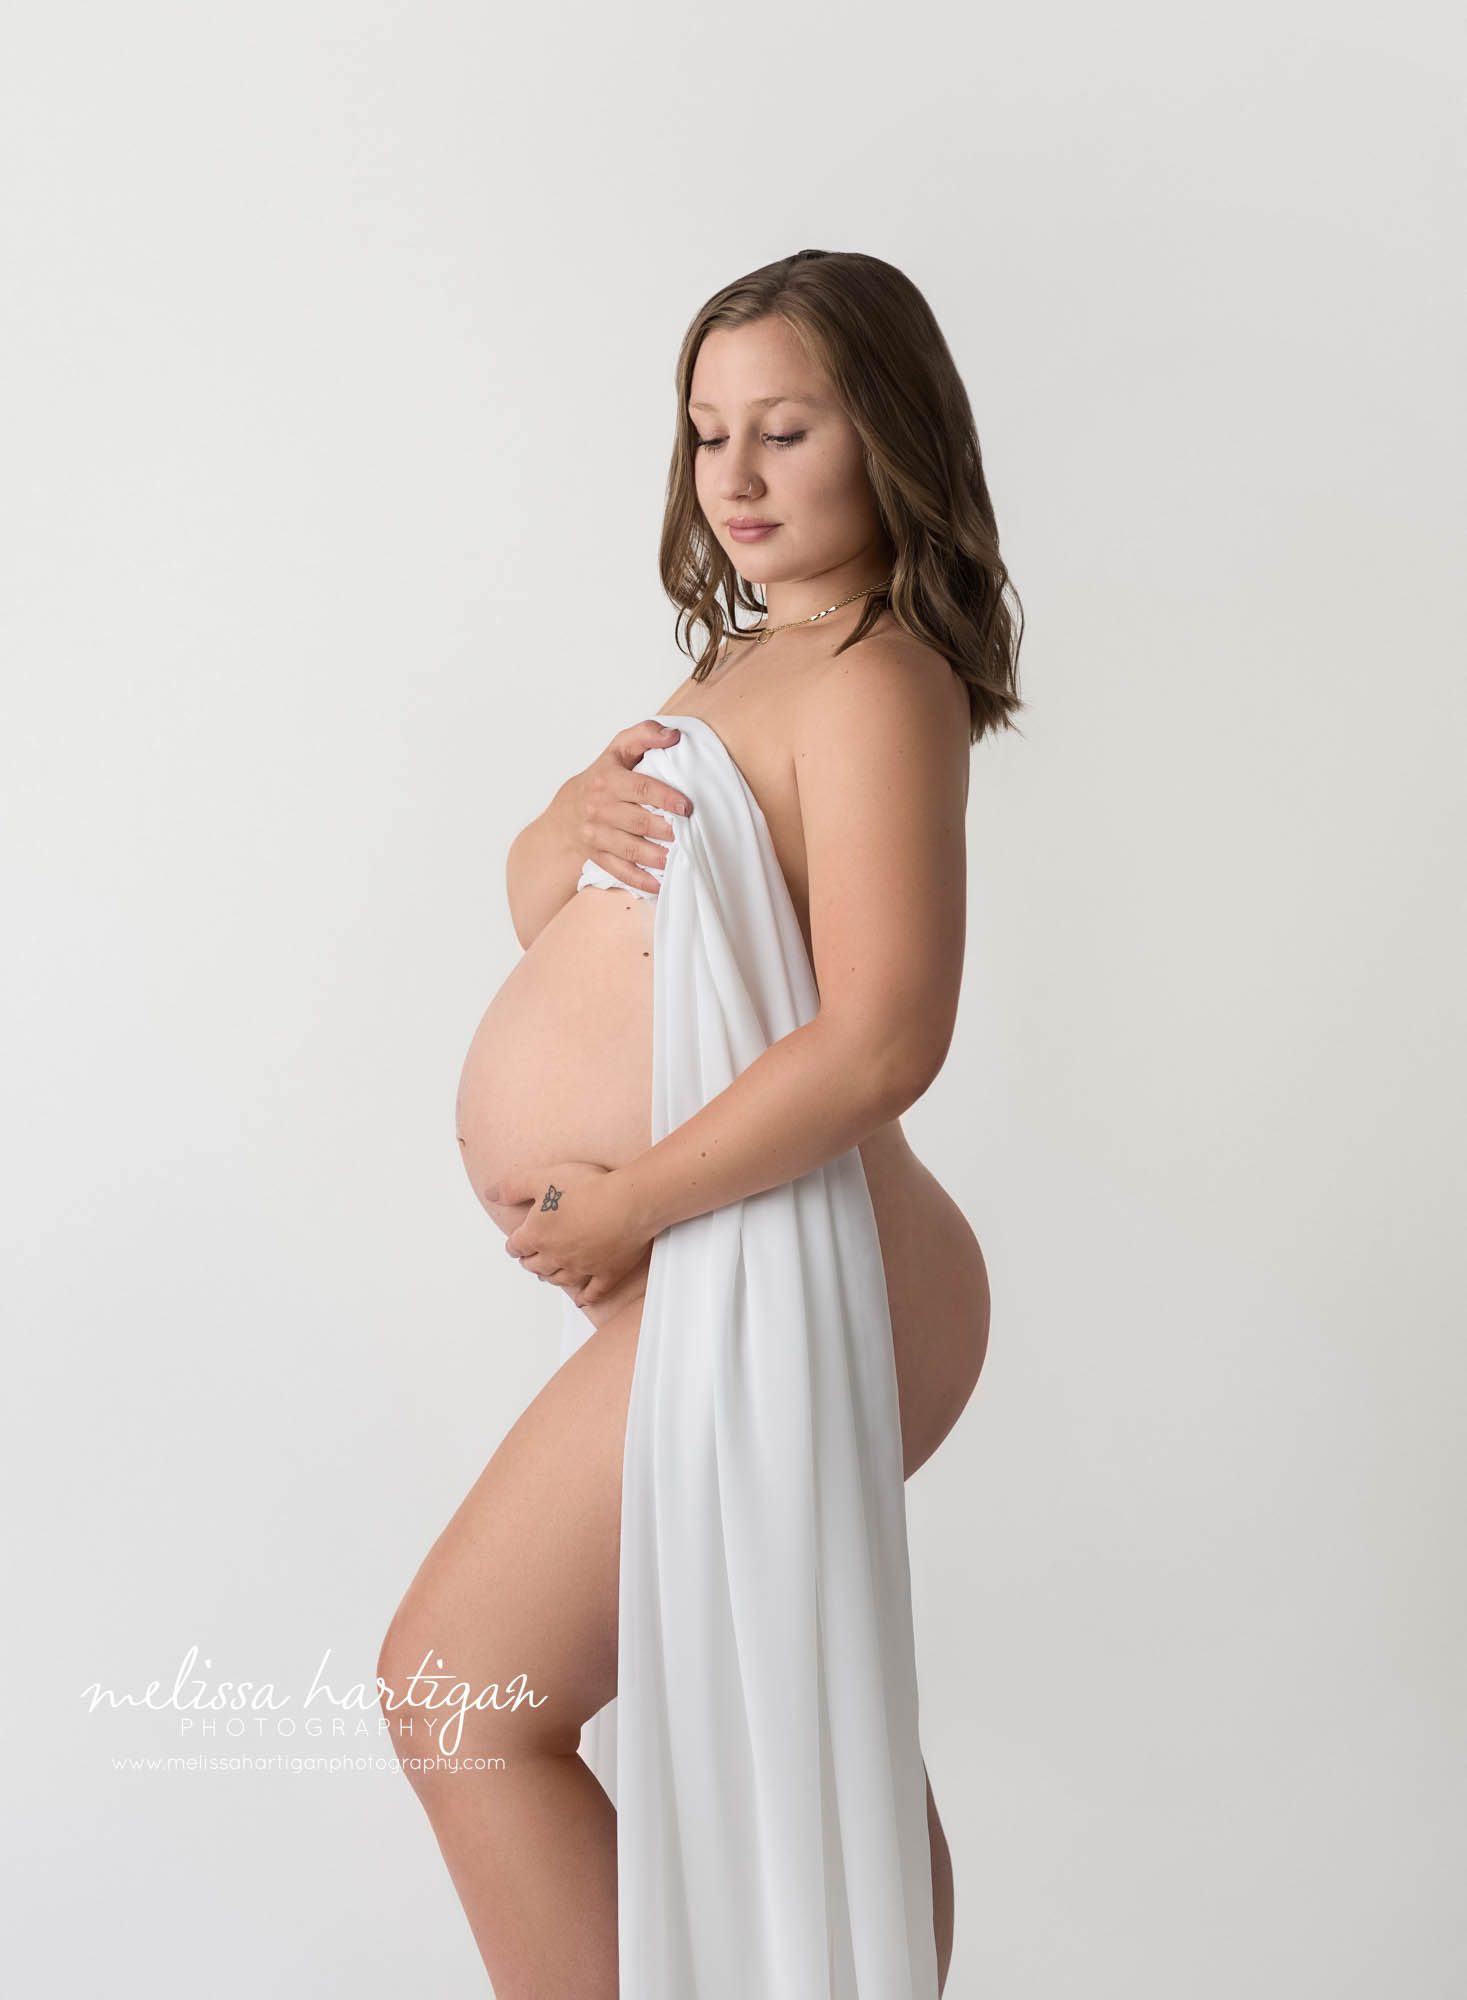 pregnant mom standign studio maternity photography holding draping fabric over baby bump